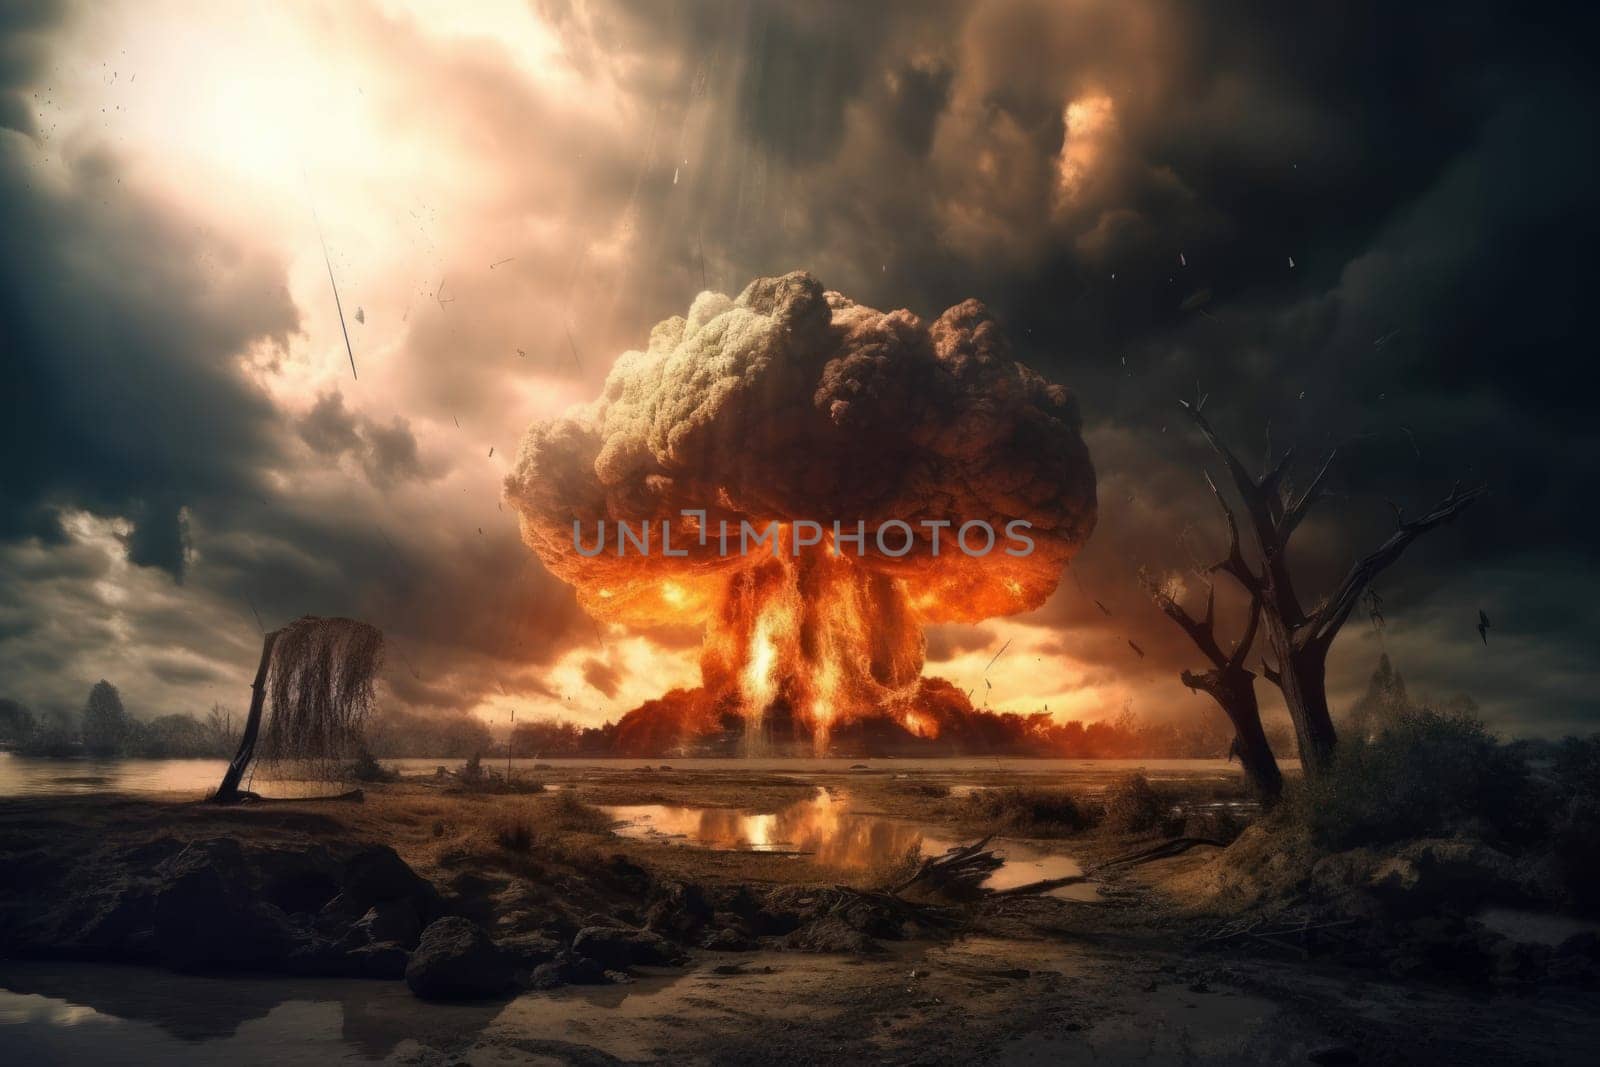 Epic scene of nuclear explosion. The End of the world by ylivdesign